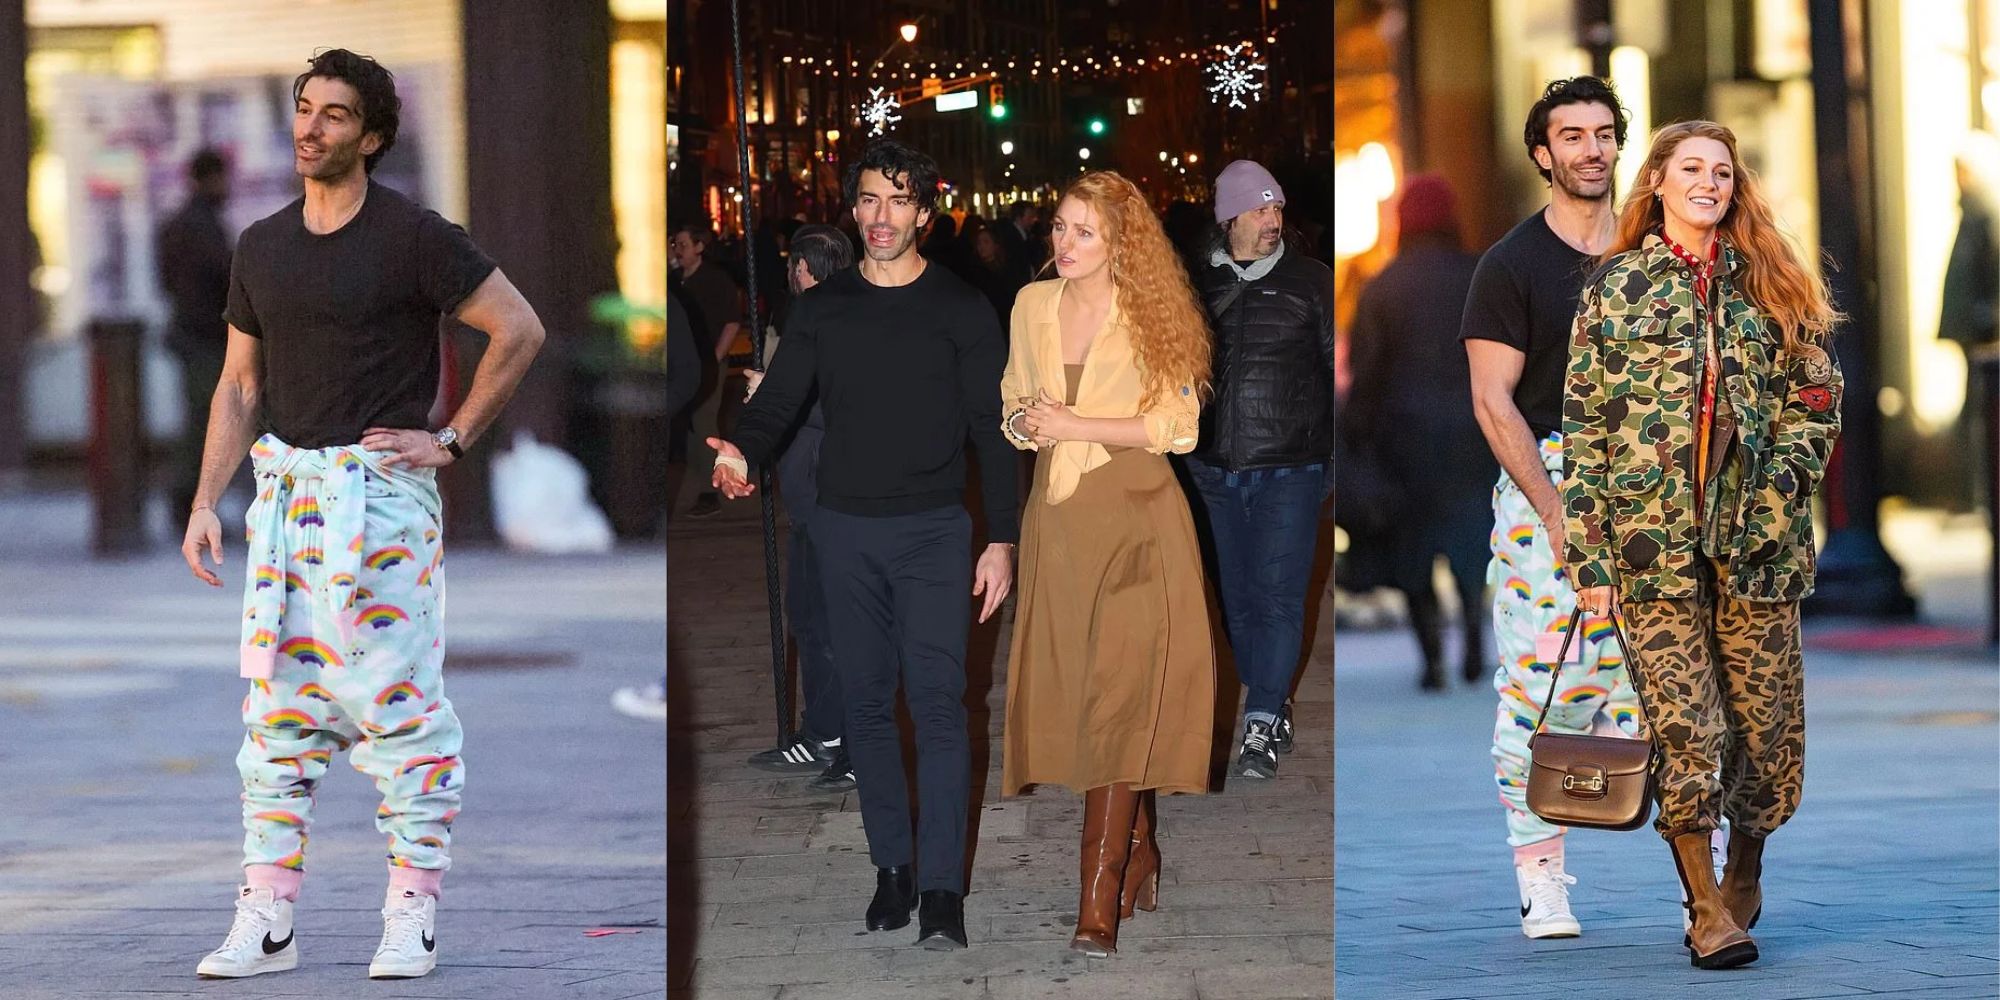 Caught in the Act! Blake Lively Spotted Sharing a Passionate Kiss with Co-star Justin Baldoni on the Set of 'It Ends With Us'